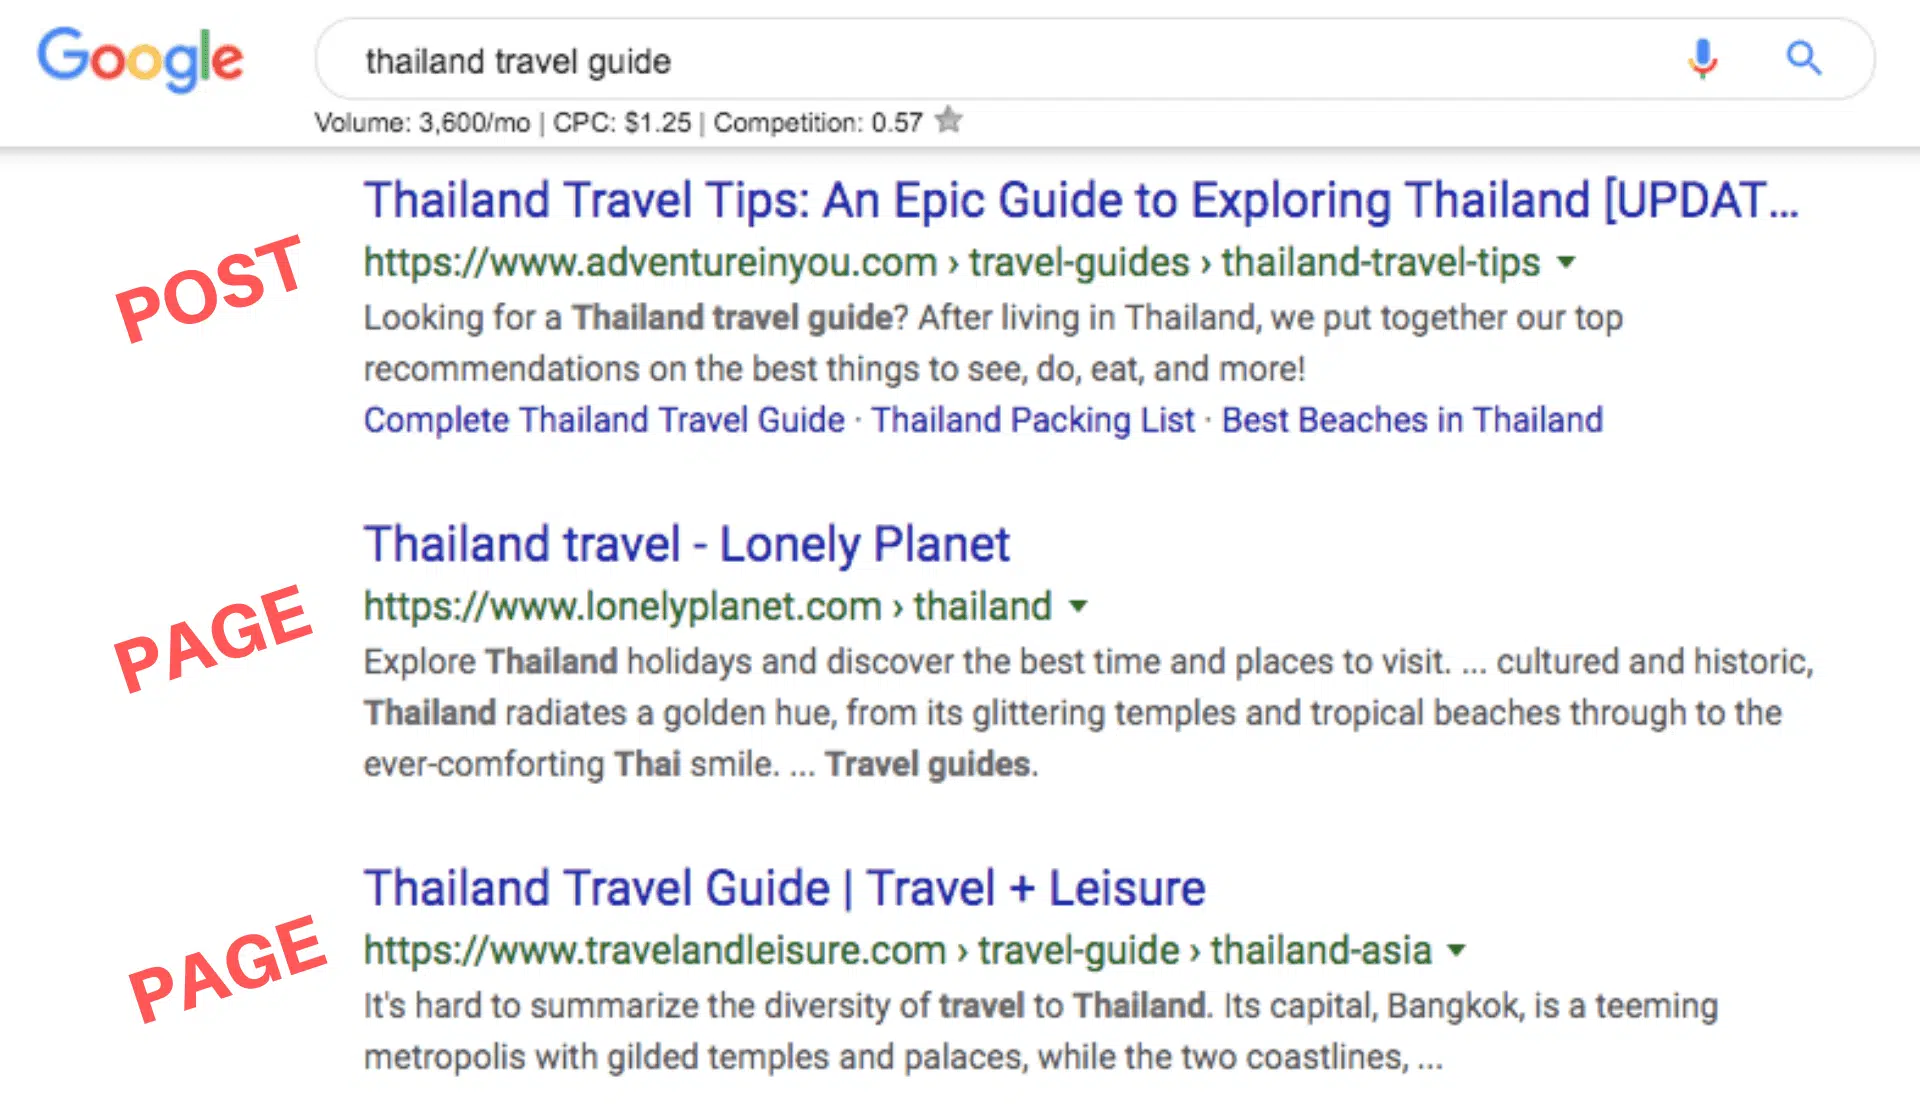 Post and pages in SERPs for "thailand travel guide"